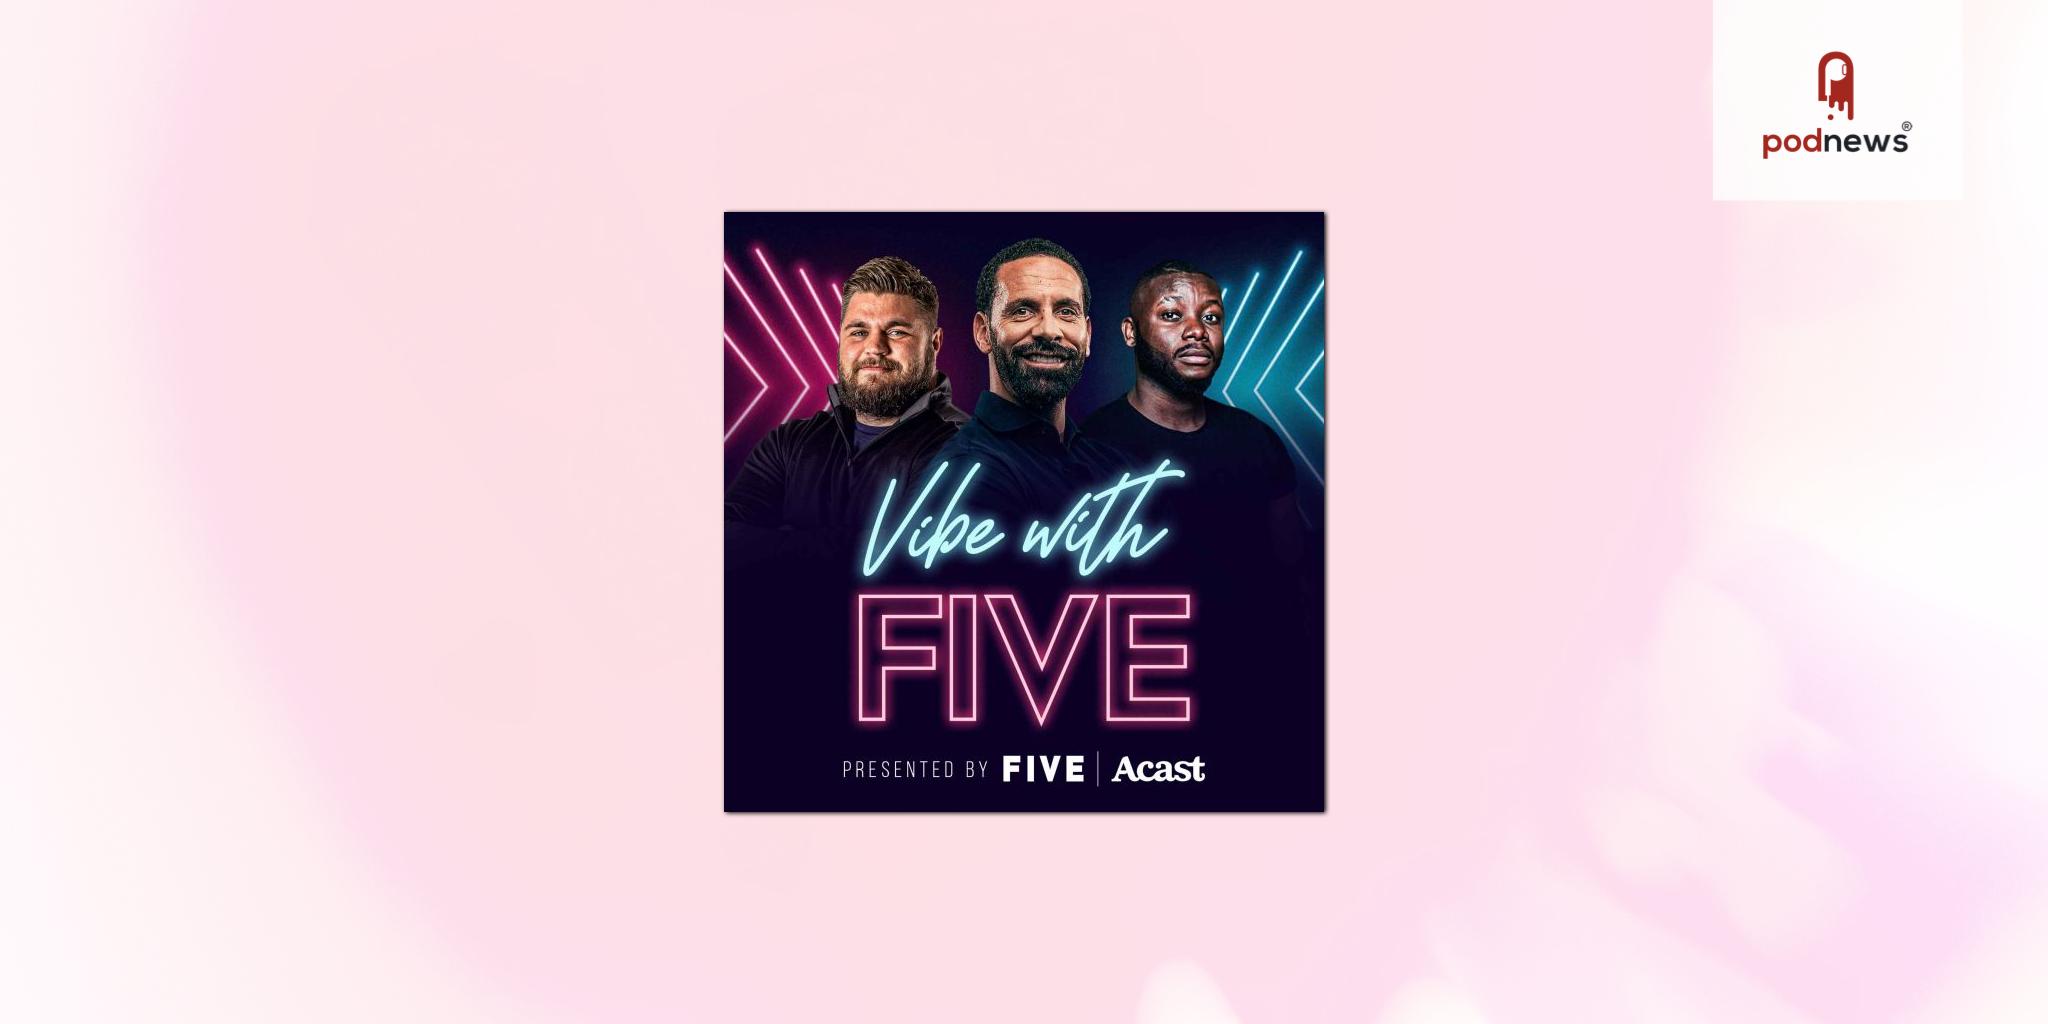 Rio Ferdinand and FIVE join the Acast Creator Network, launching their first podcast, Vibe with FIVE